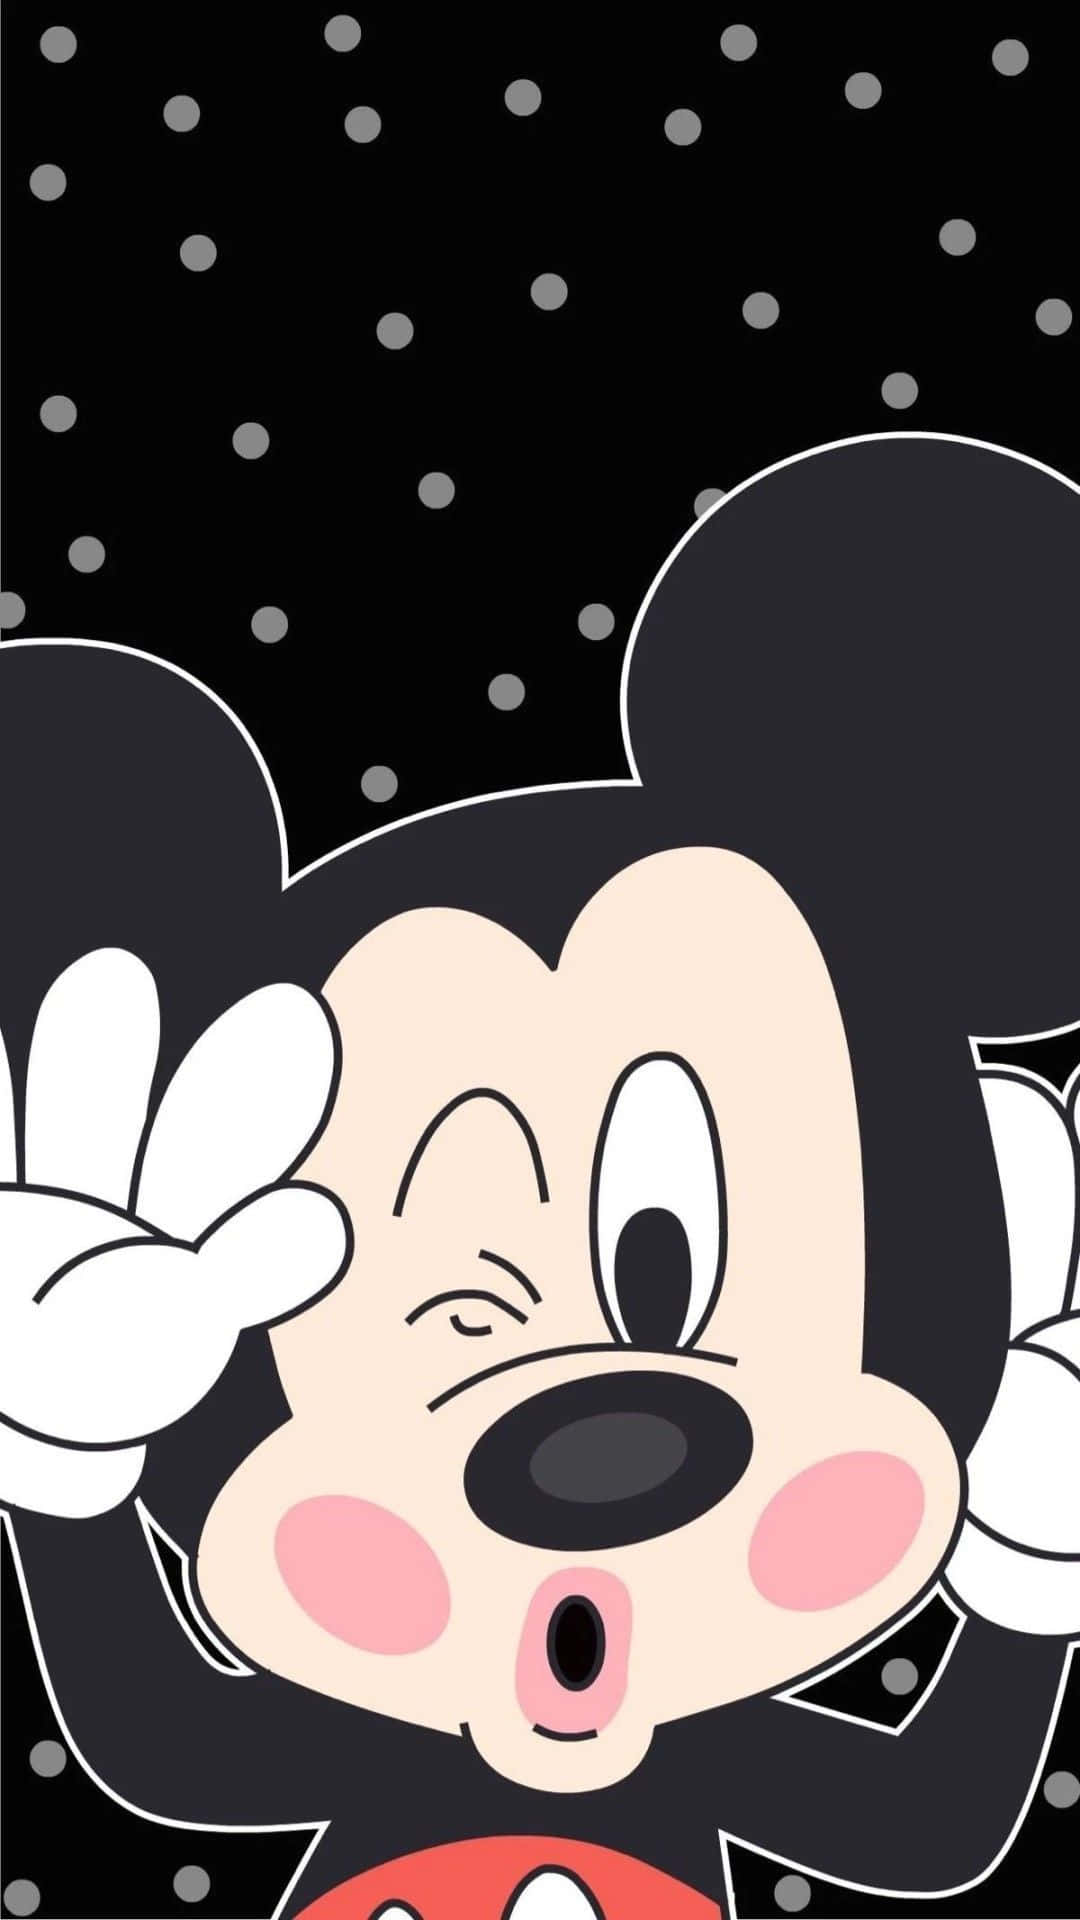 The iconic and oh-so-cute Mickey Mouse Wallpaper